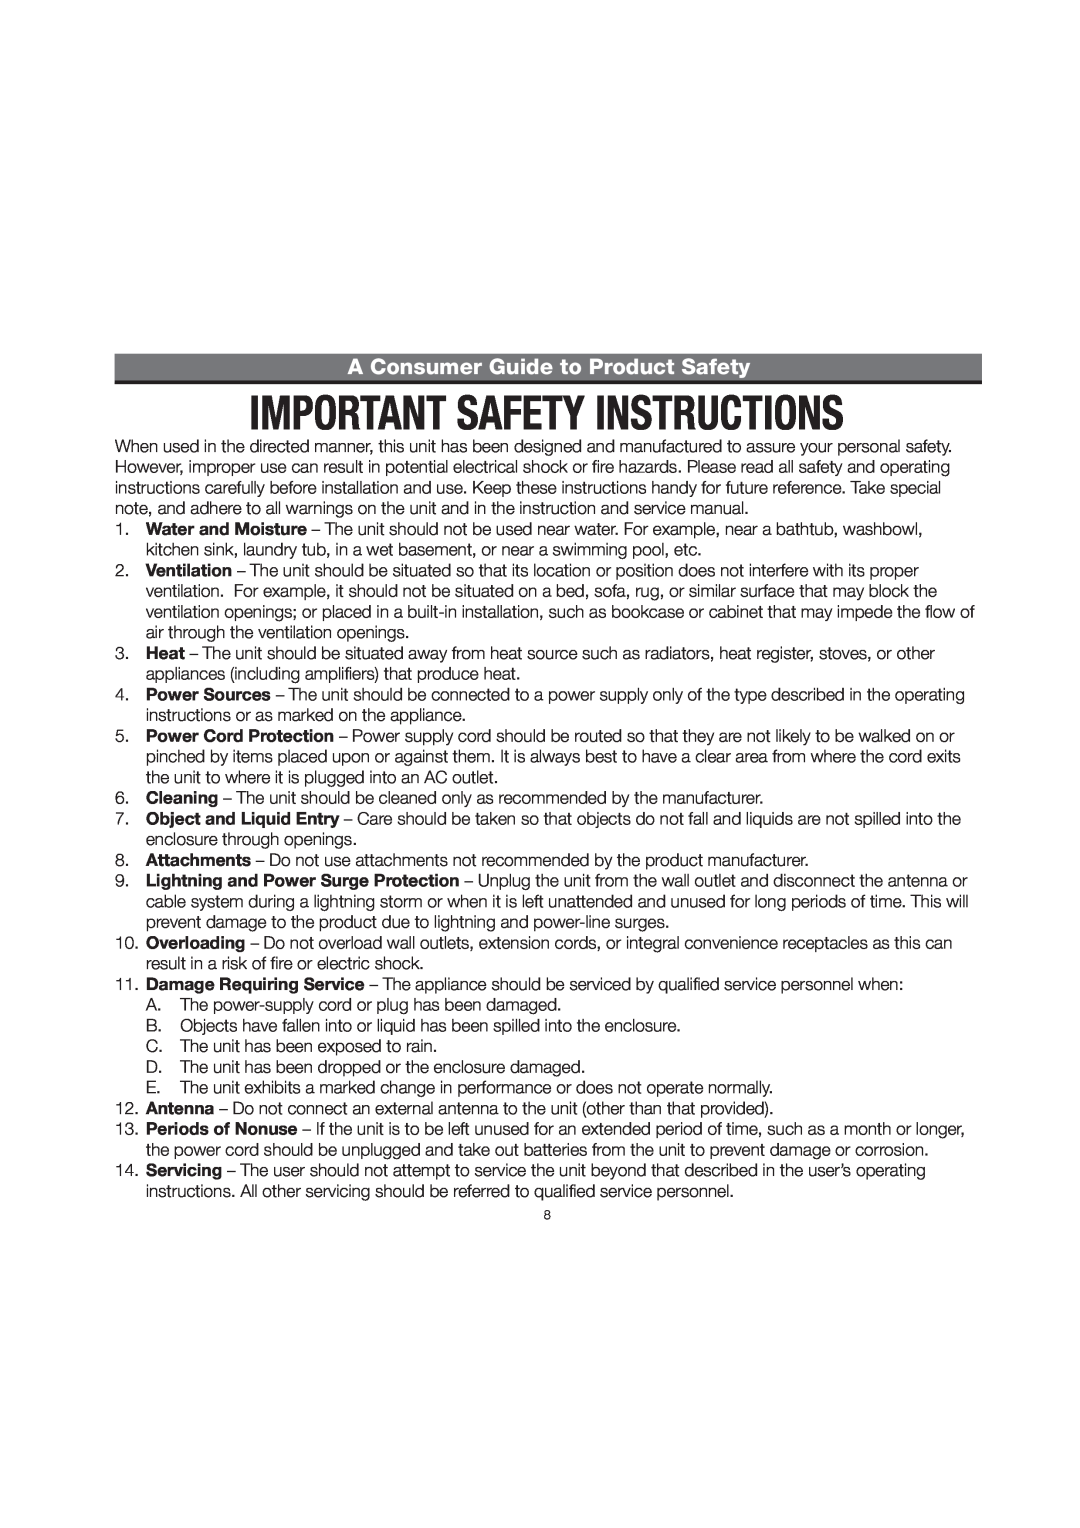 iHome IP39 manual A Consumer Guide to Product Safety 